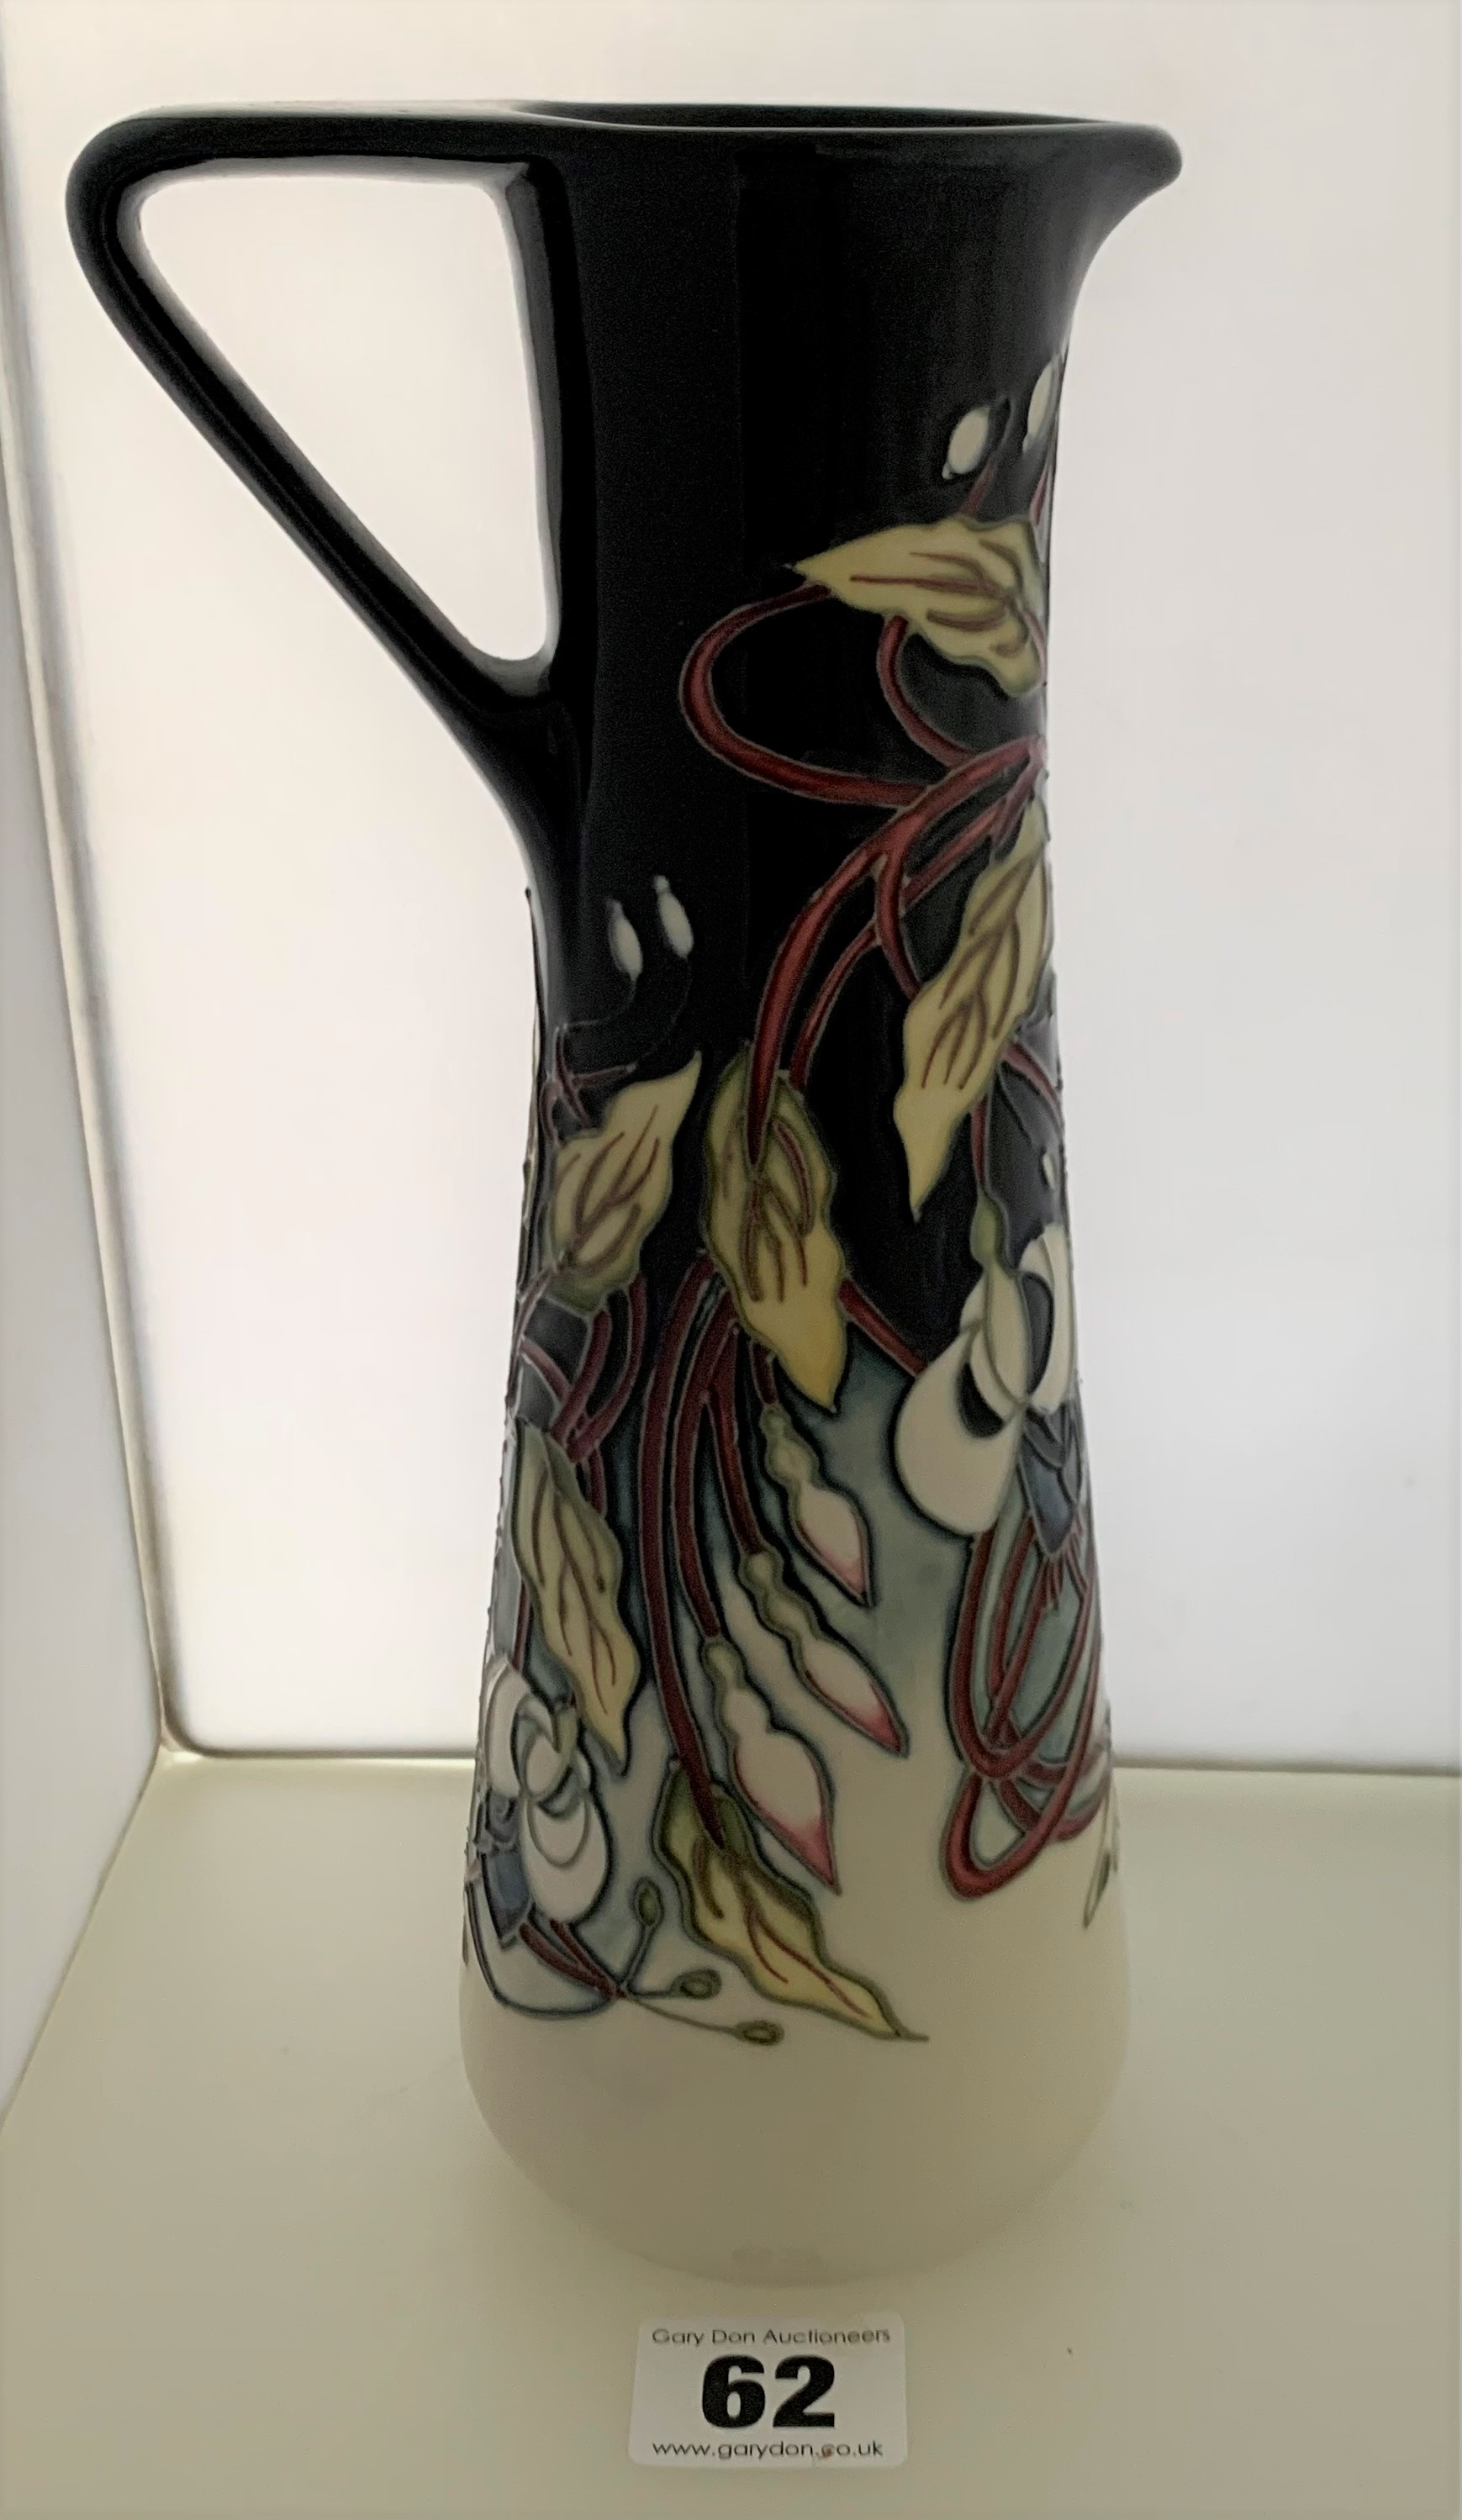 Blue Moorcroft jug, signed and dated 2012, 66/75, 9.5” high - Image 3 of 6